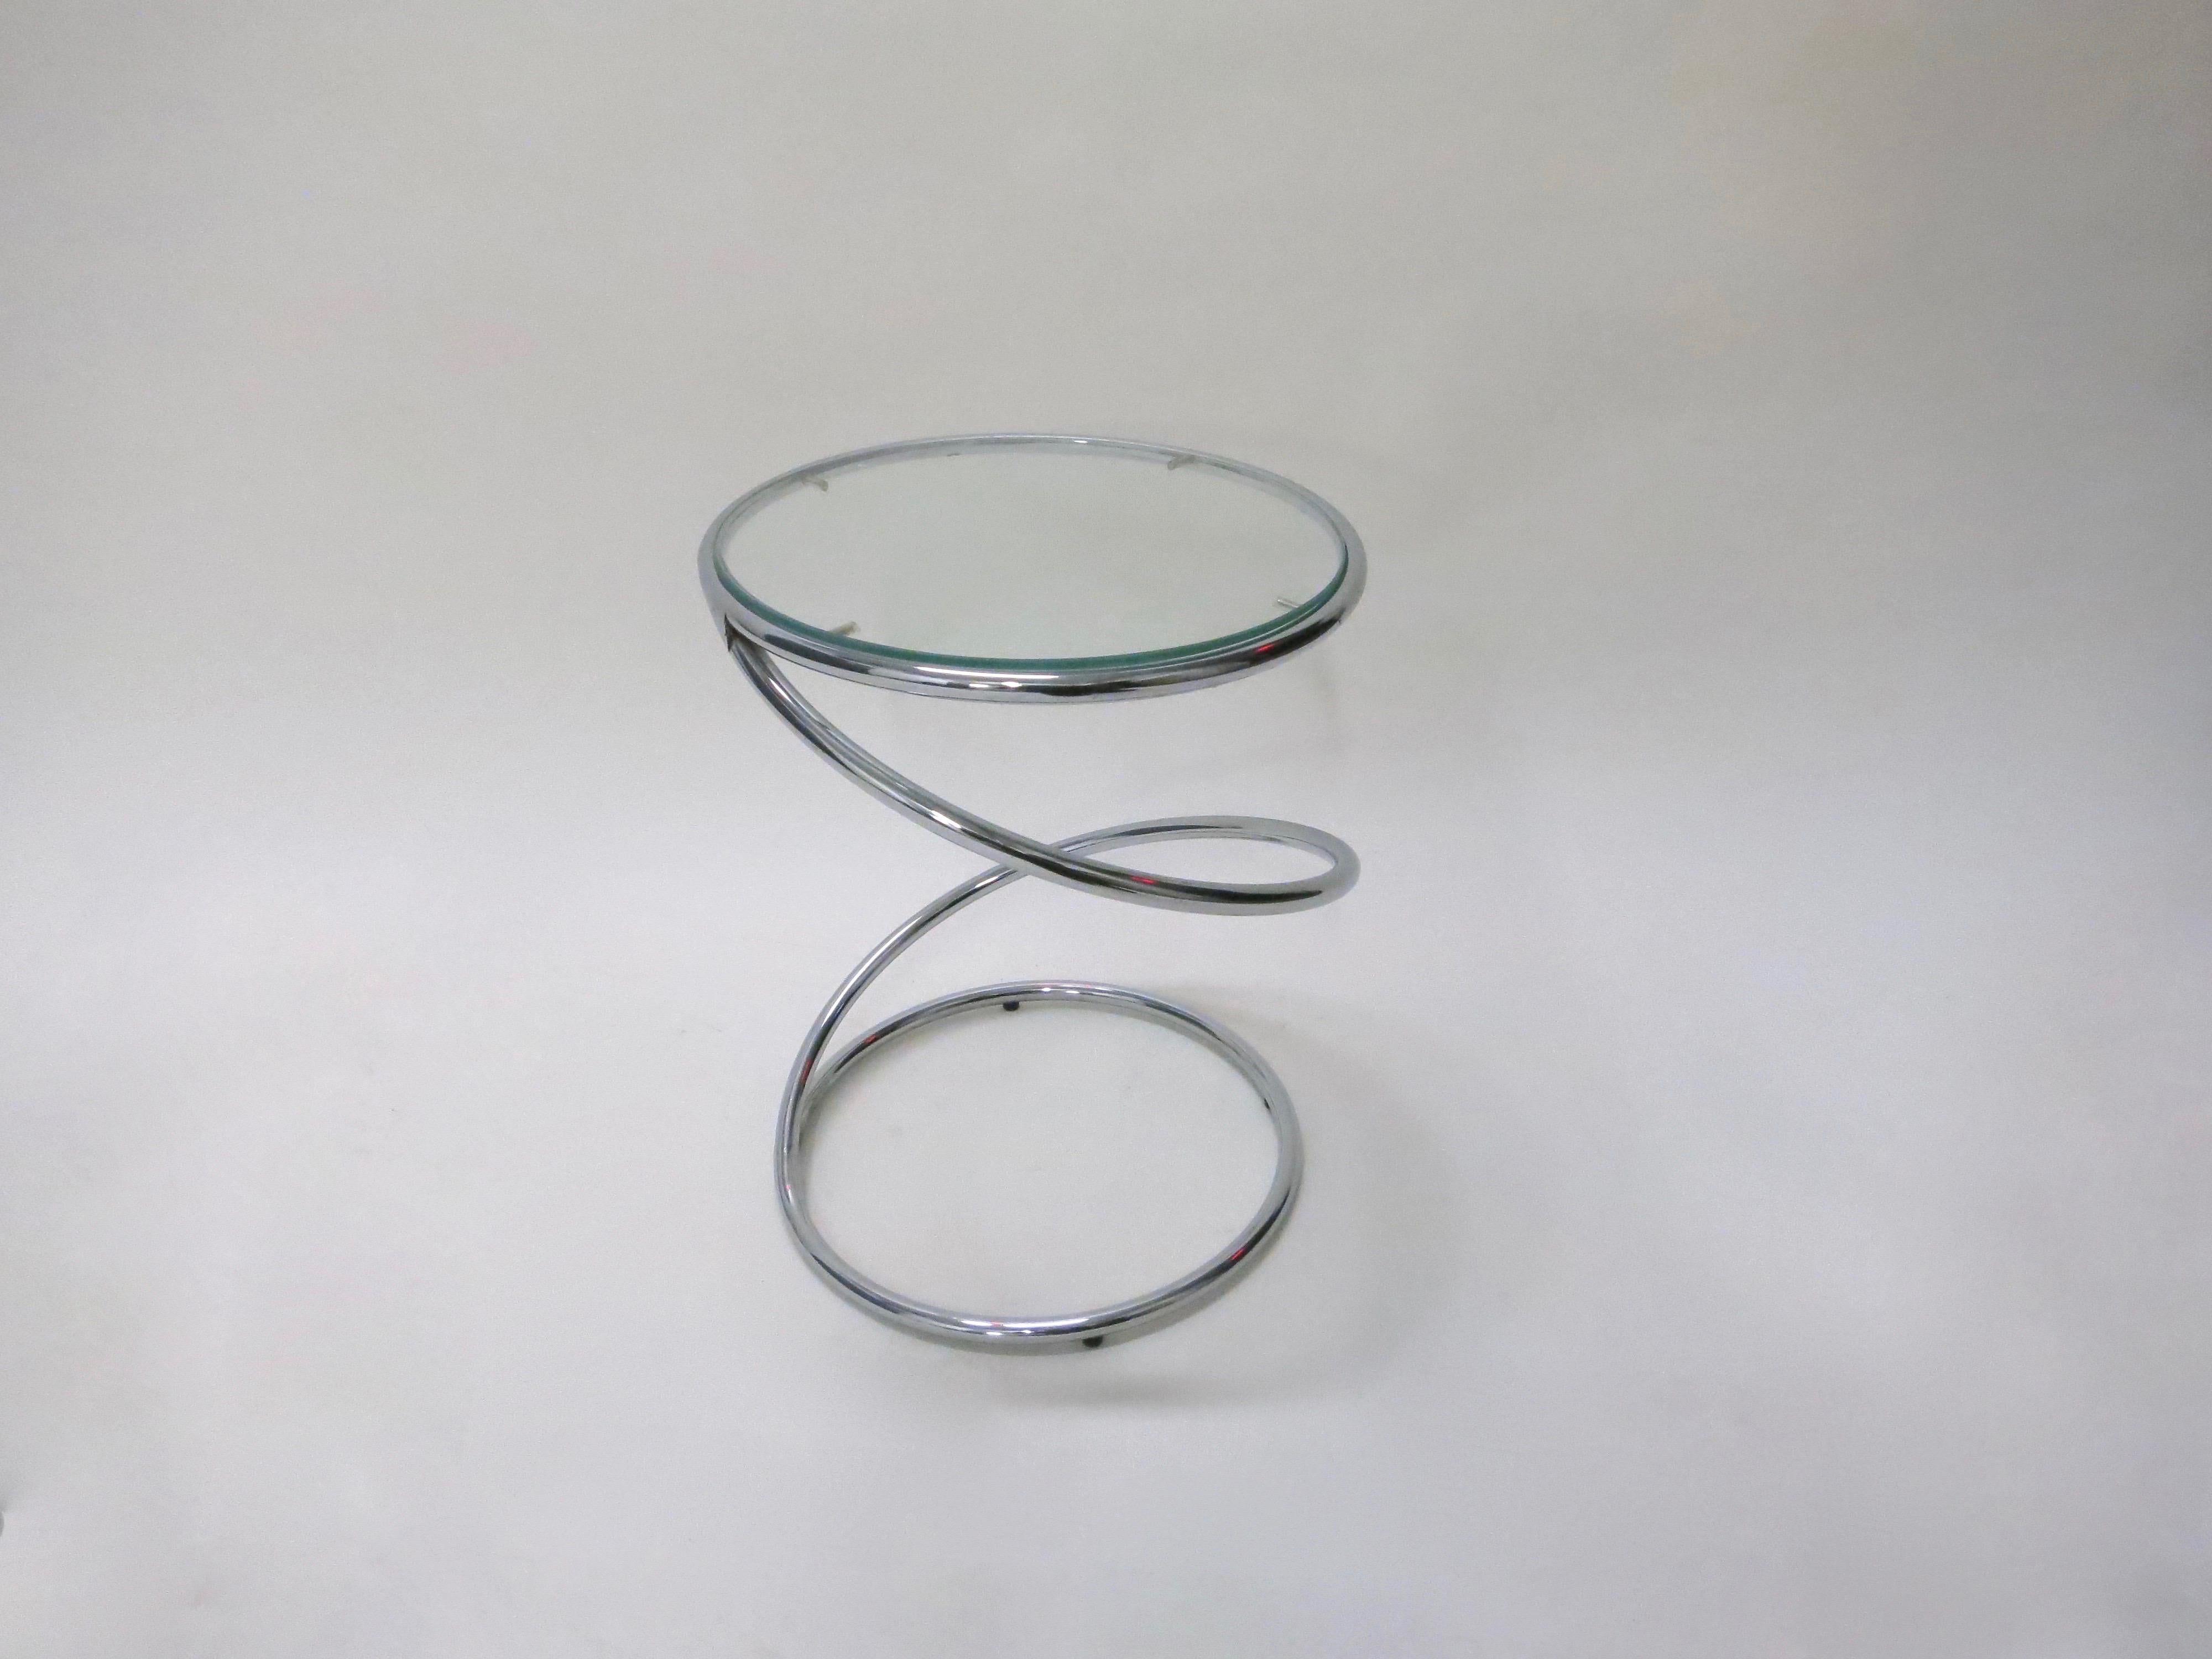 Pair of chromed metal tables in the shape of a spiral each with a round clear glass top supported on a round base with four feet on the bottom. Black mirrored glass tops also available, as shown in the last image.